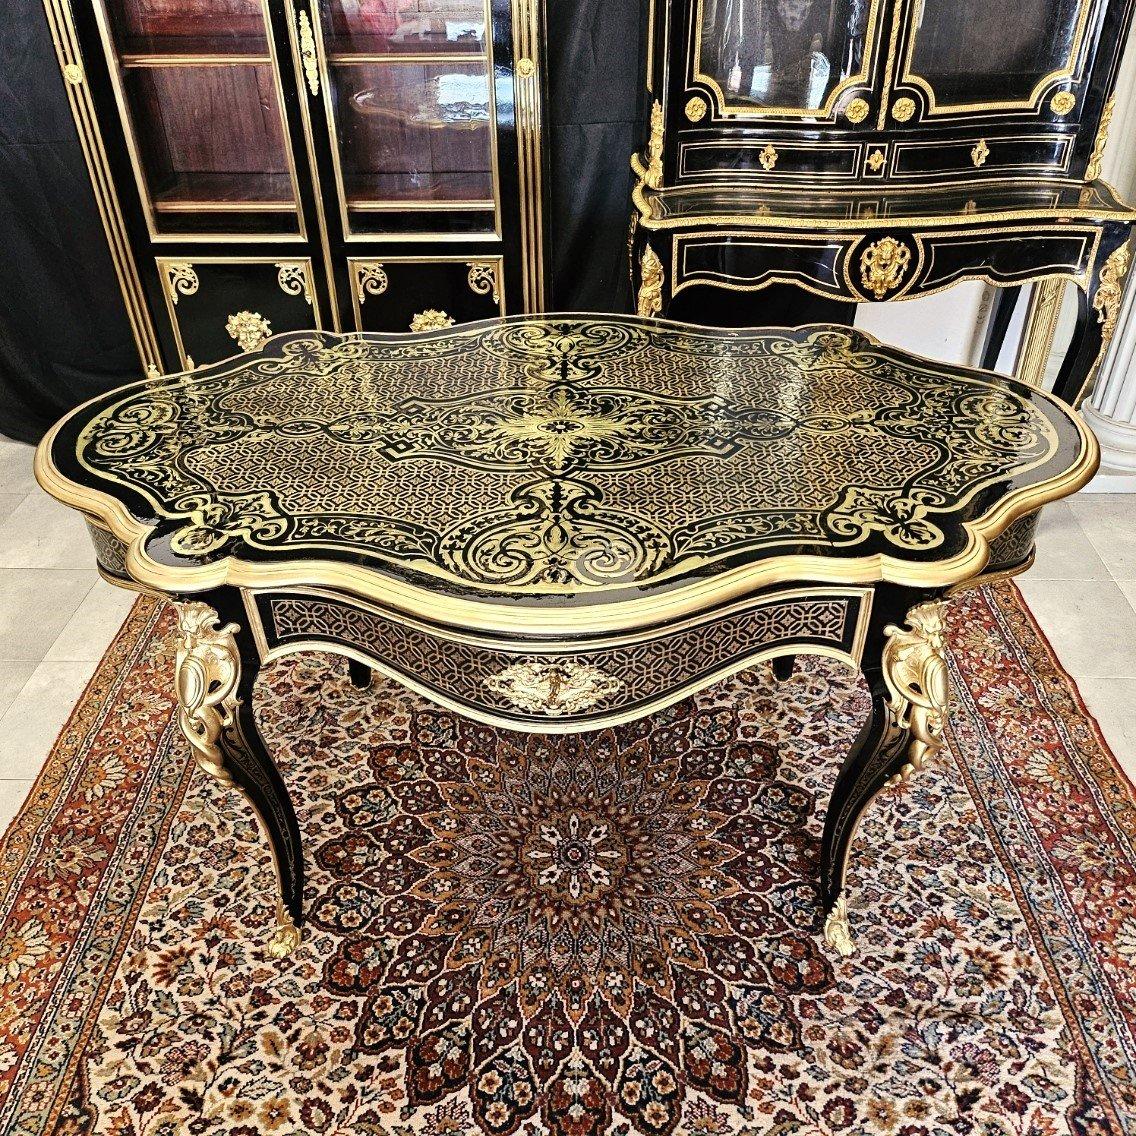 Diehl Black French Table Napoleon III Boulle Brass Gilt Bronze 19th Century For Sale 8